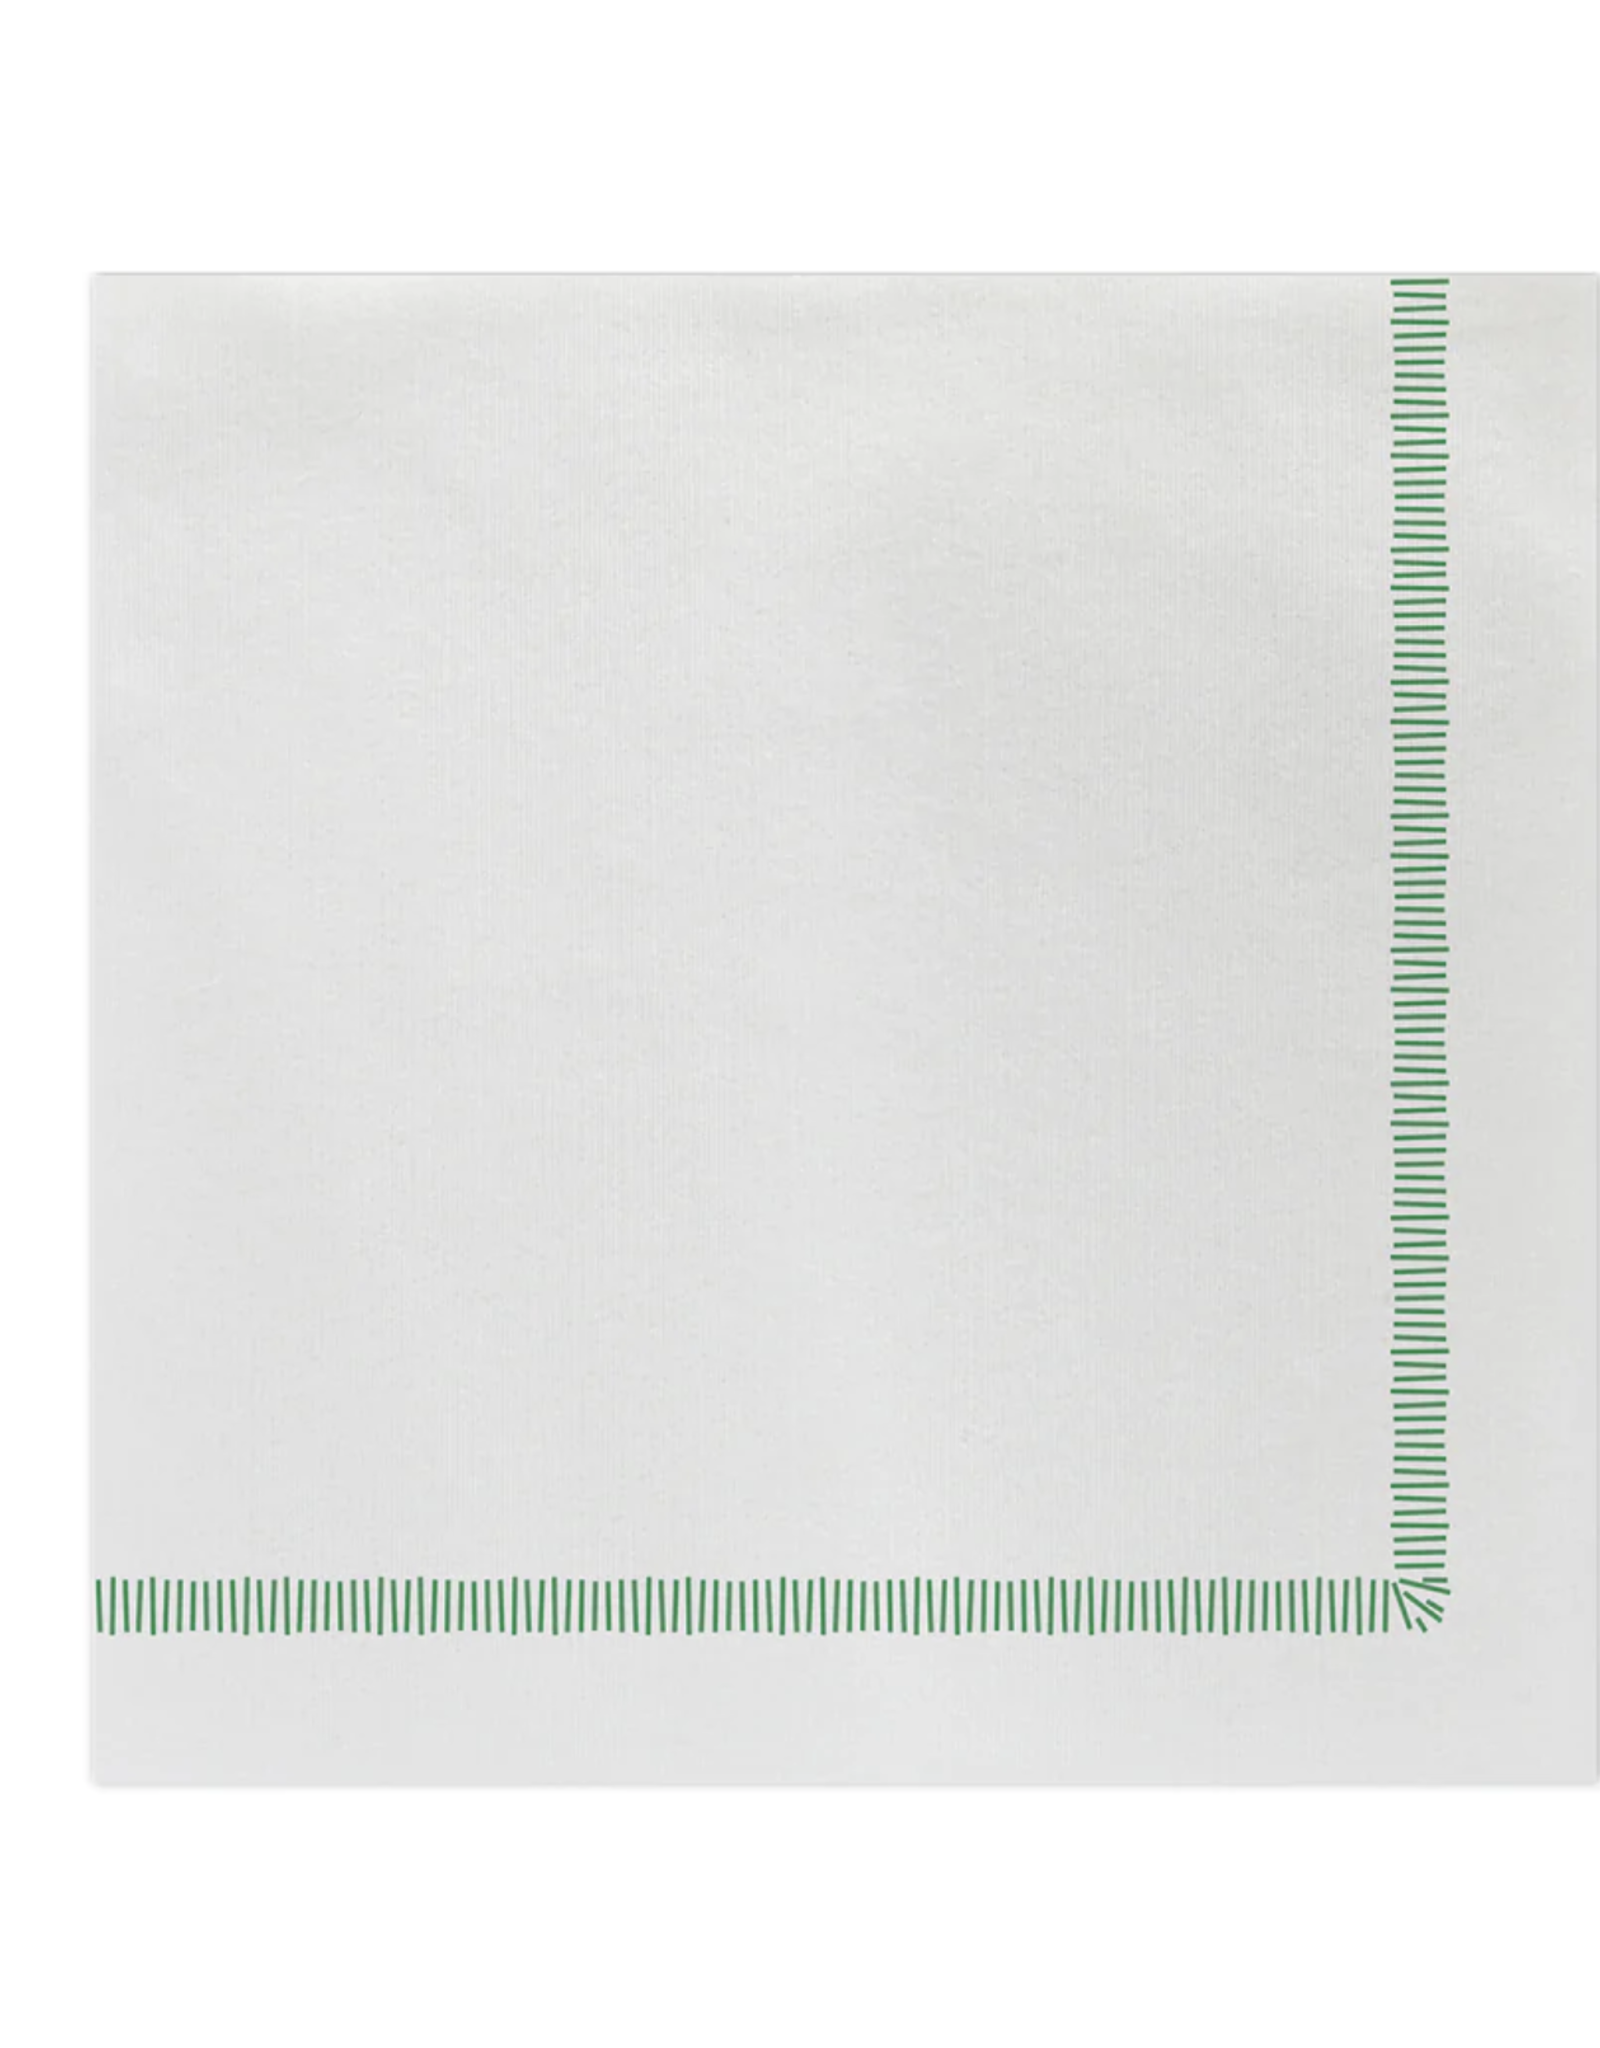 Vietri Papersoft Dinner Napkins with Green Fringe